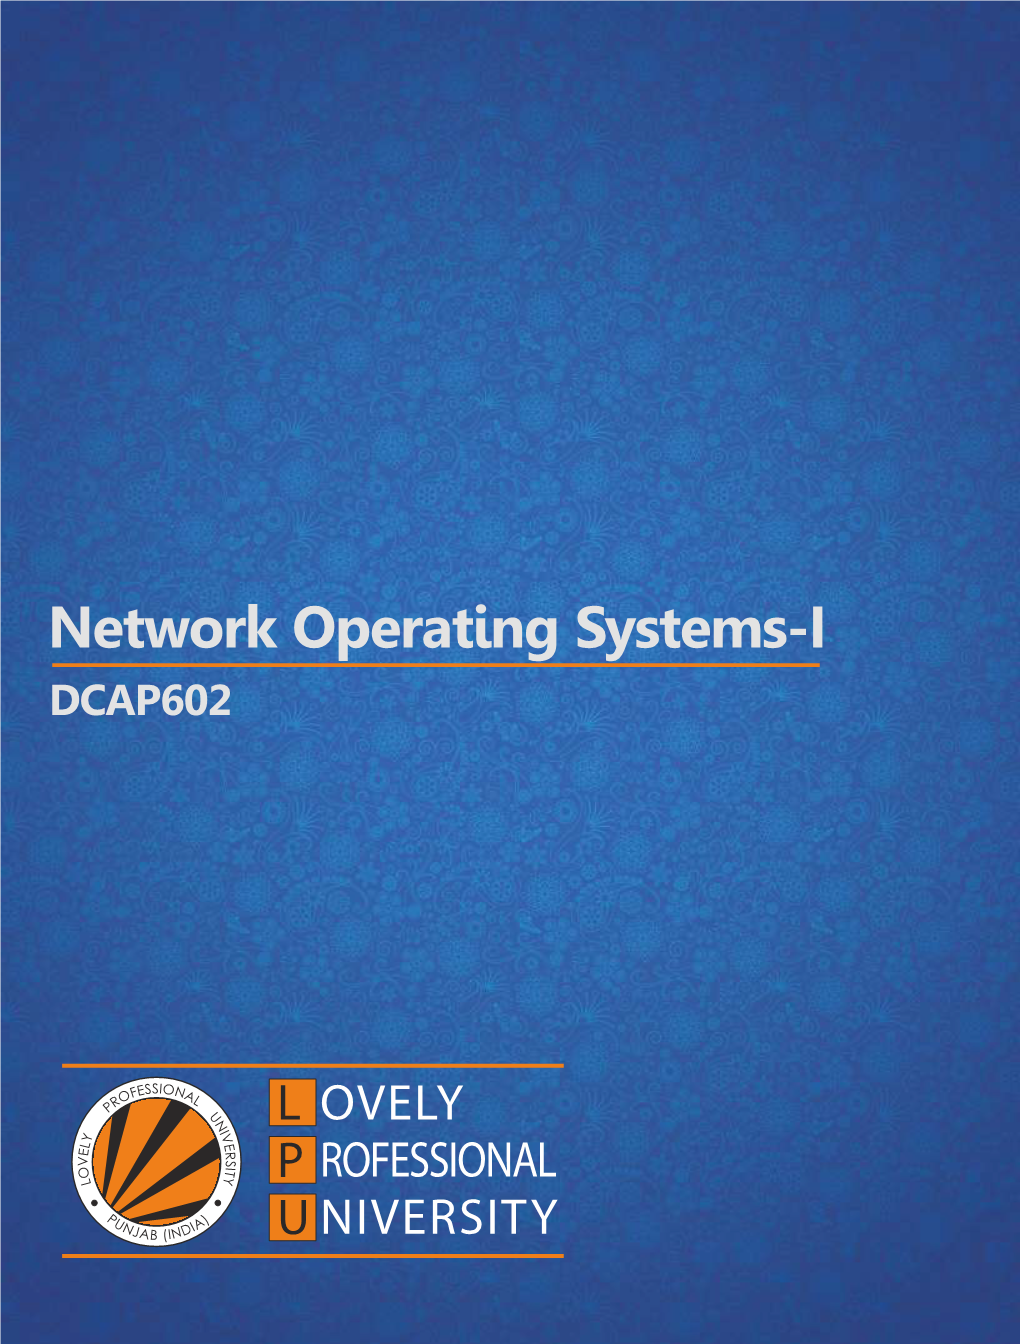 Network Operating Systems-I DCAP602